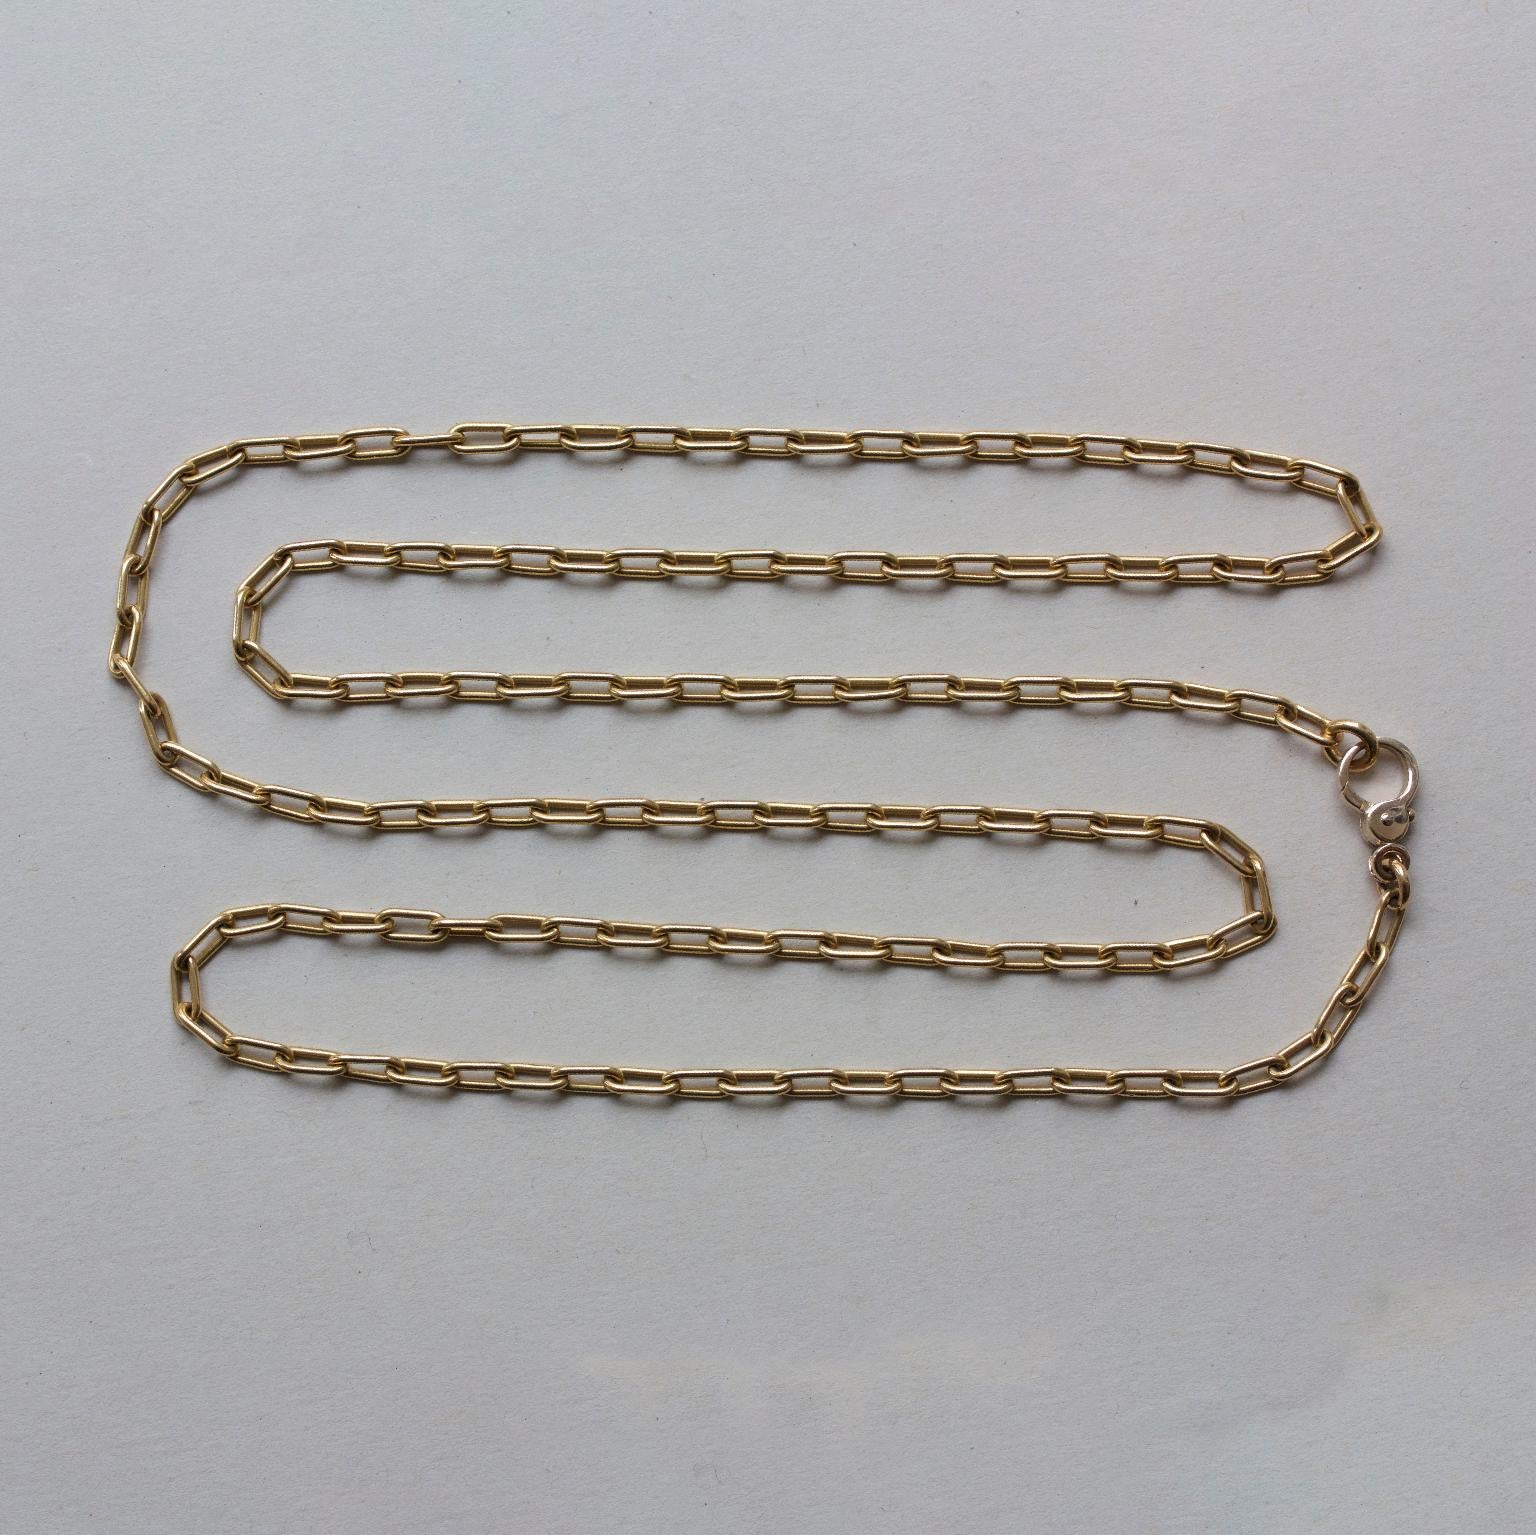 A vintage 18 carat yellow gold long chain with a paperclip link with a large 18 carat gold white gold clasp, signed: Pomellato, Italy, circa 1980.

weight: 35.14 grams
length: 84 cm
width: 3 mm